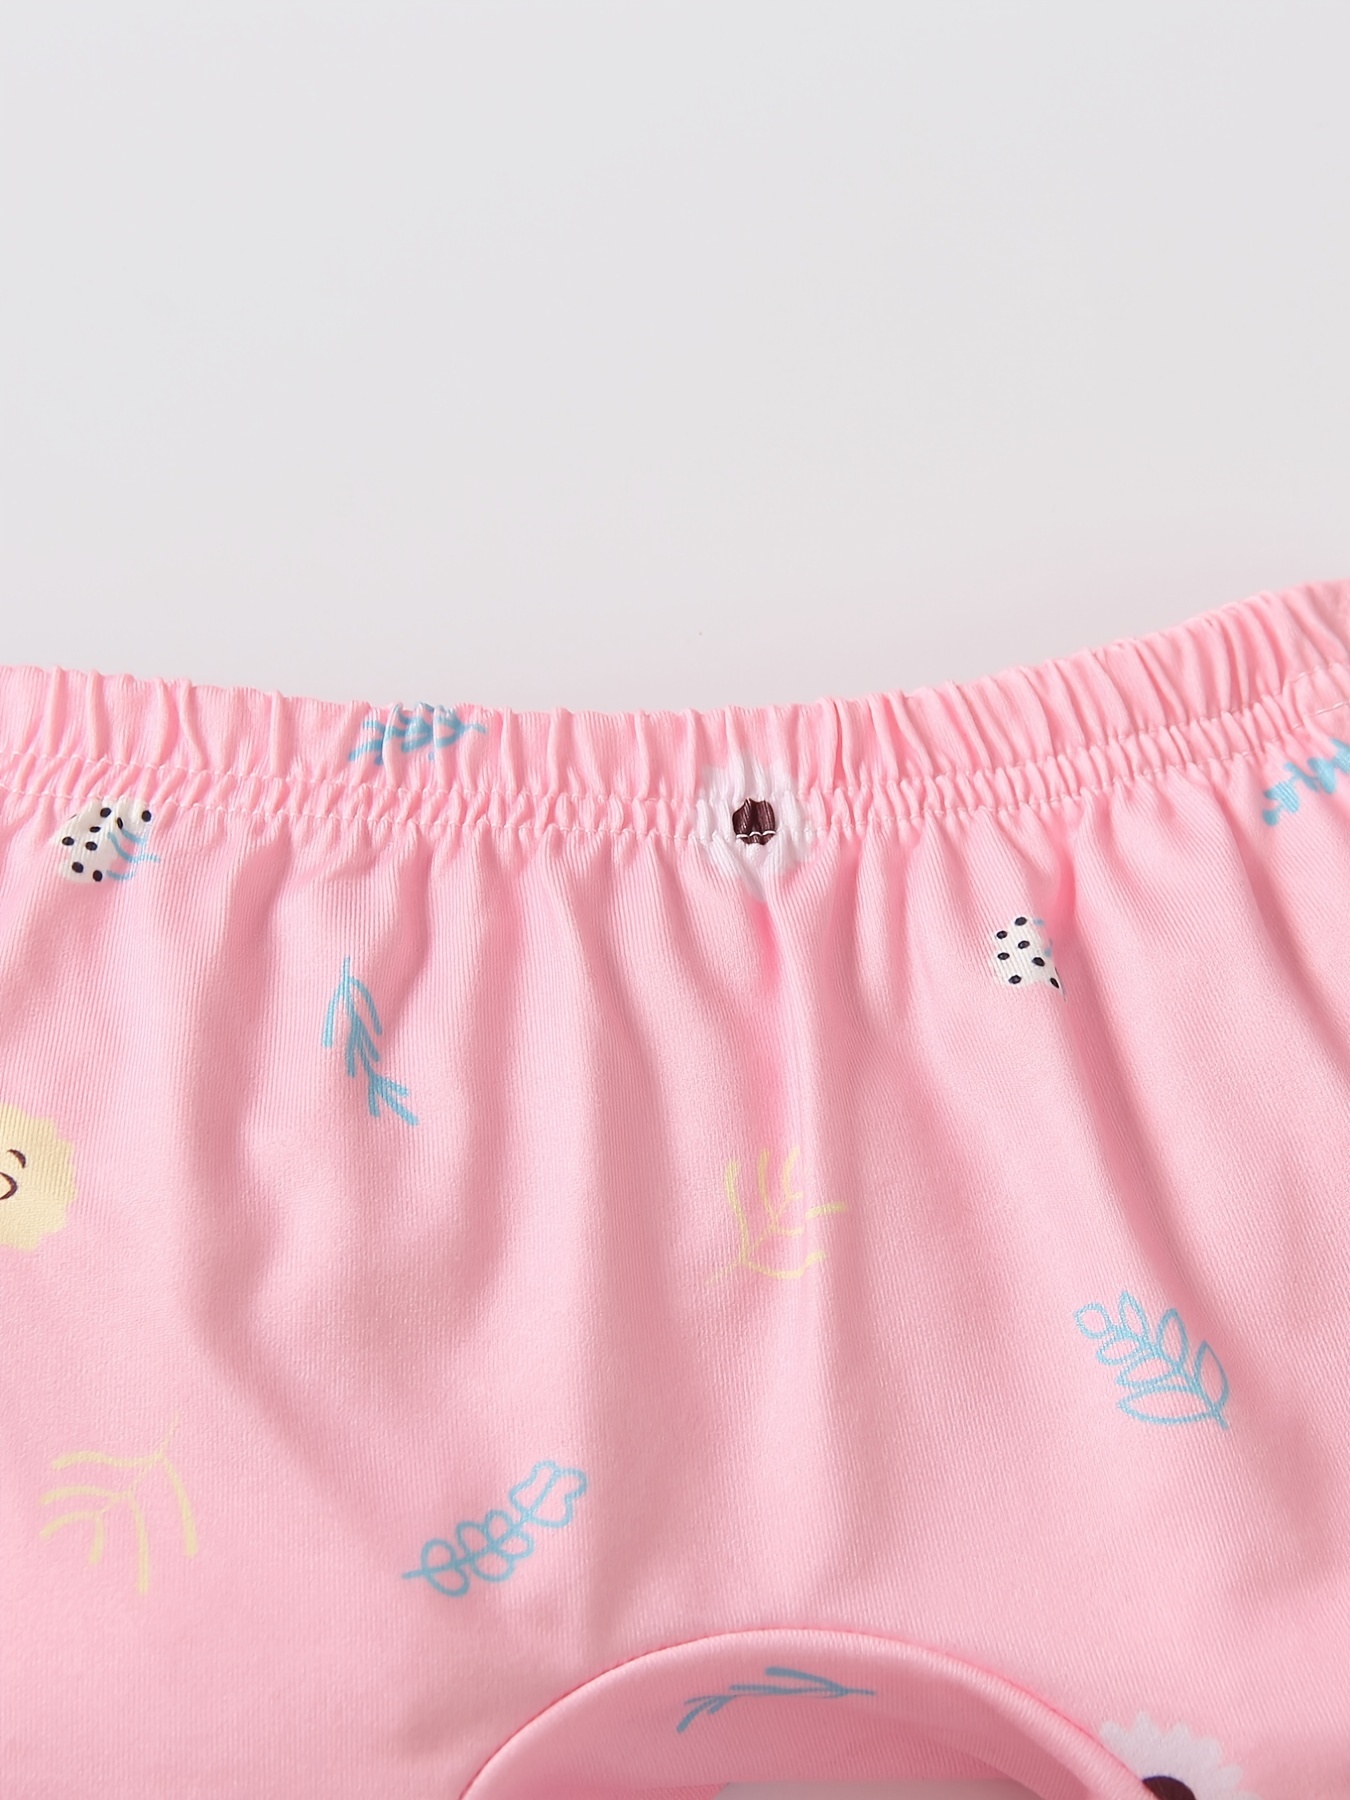 SMY 4 Pcs/Lot Cotton Kid Girl's Cute Brief Panties Cartoon Soft Children  Underwear Breathable Kids Underpants For 2-12Yrs